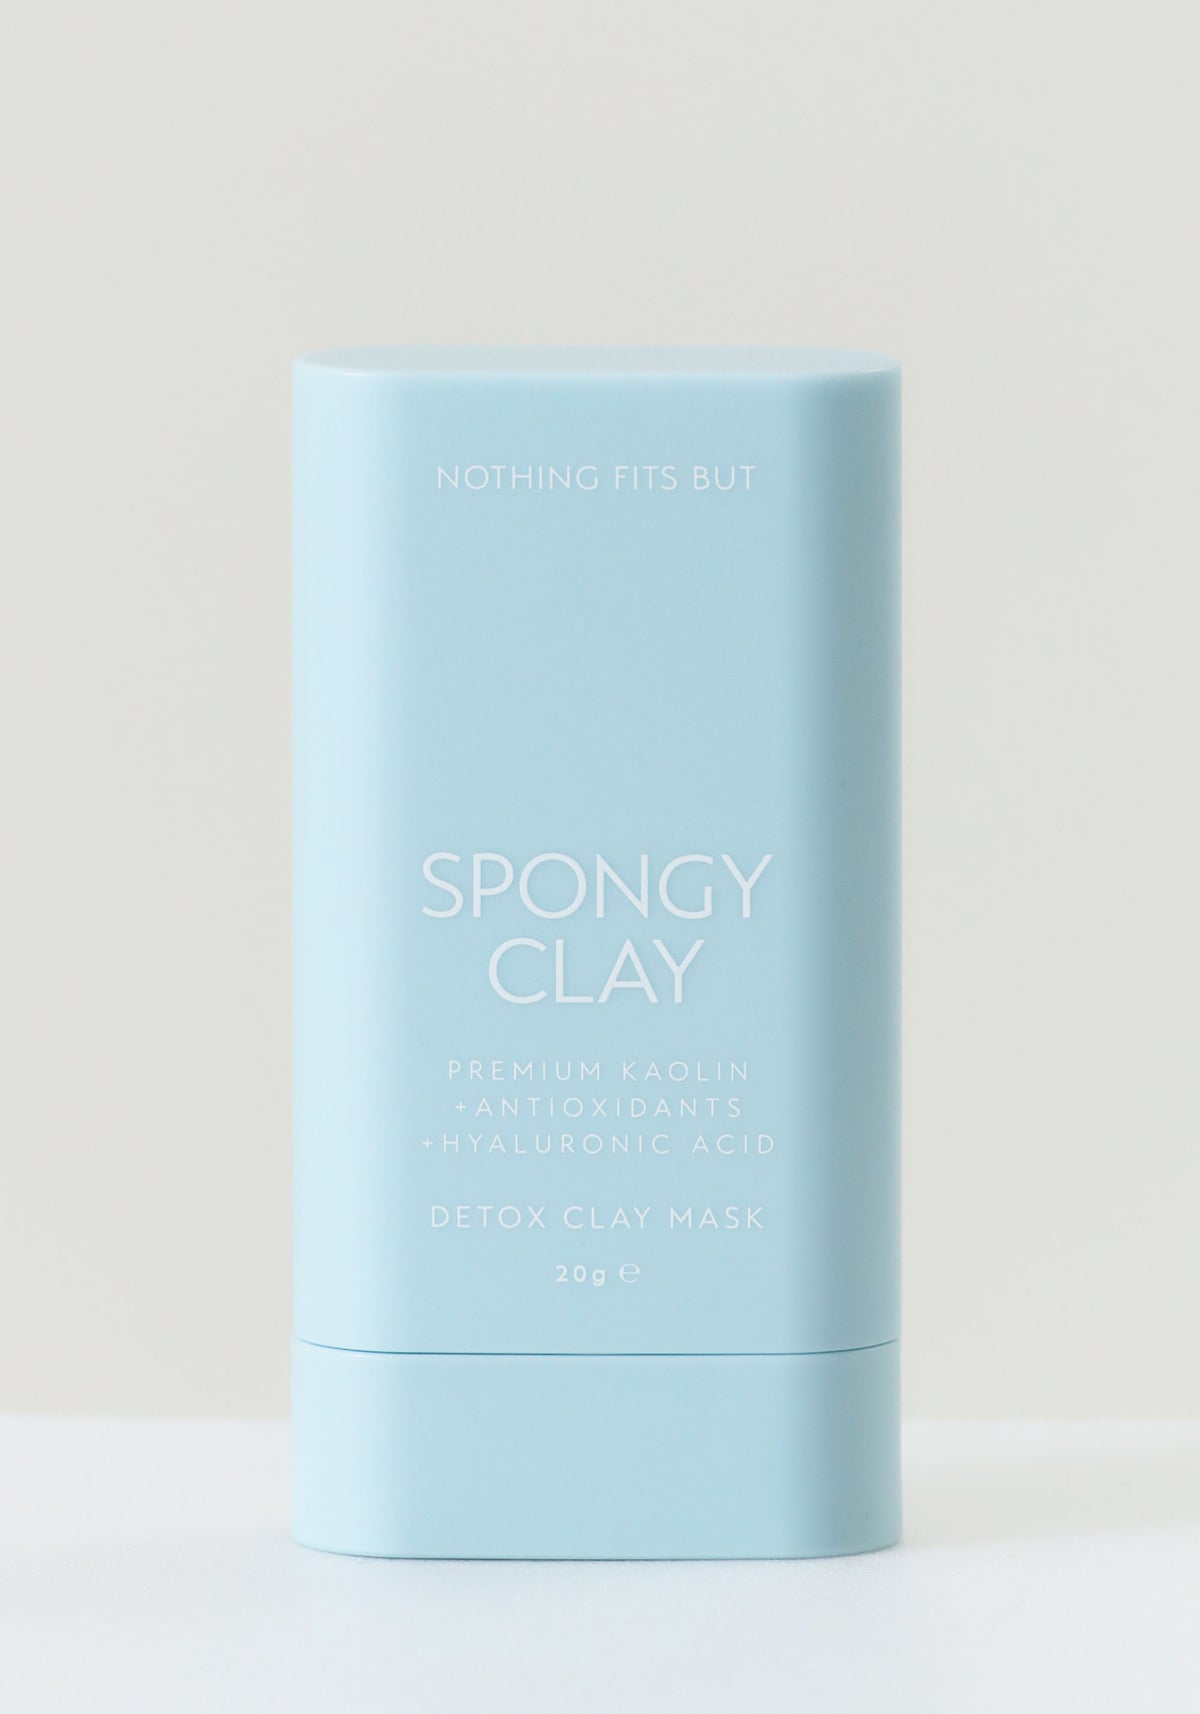 PORE PURIFYING DETOX SPONGY CLAY STICK MASK & SILICONE BRUSH PAD